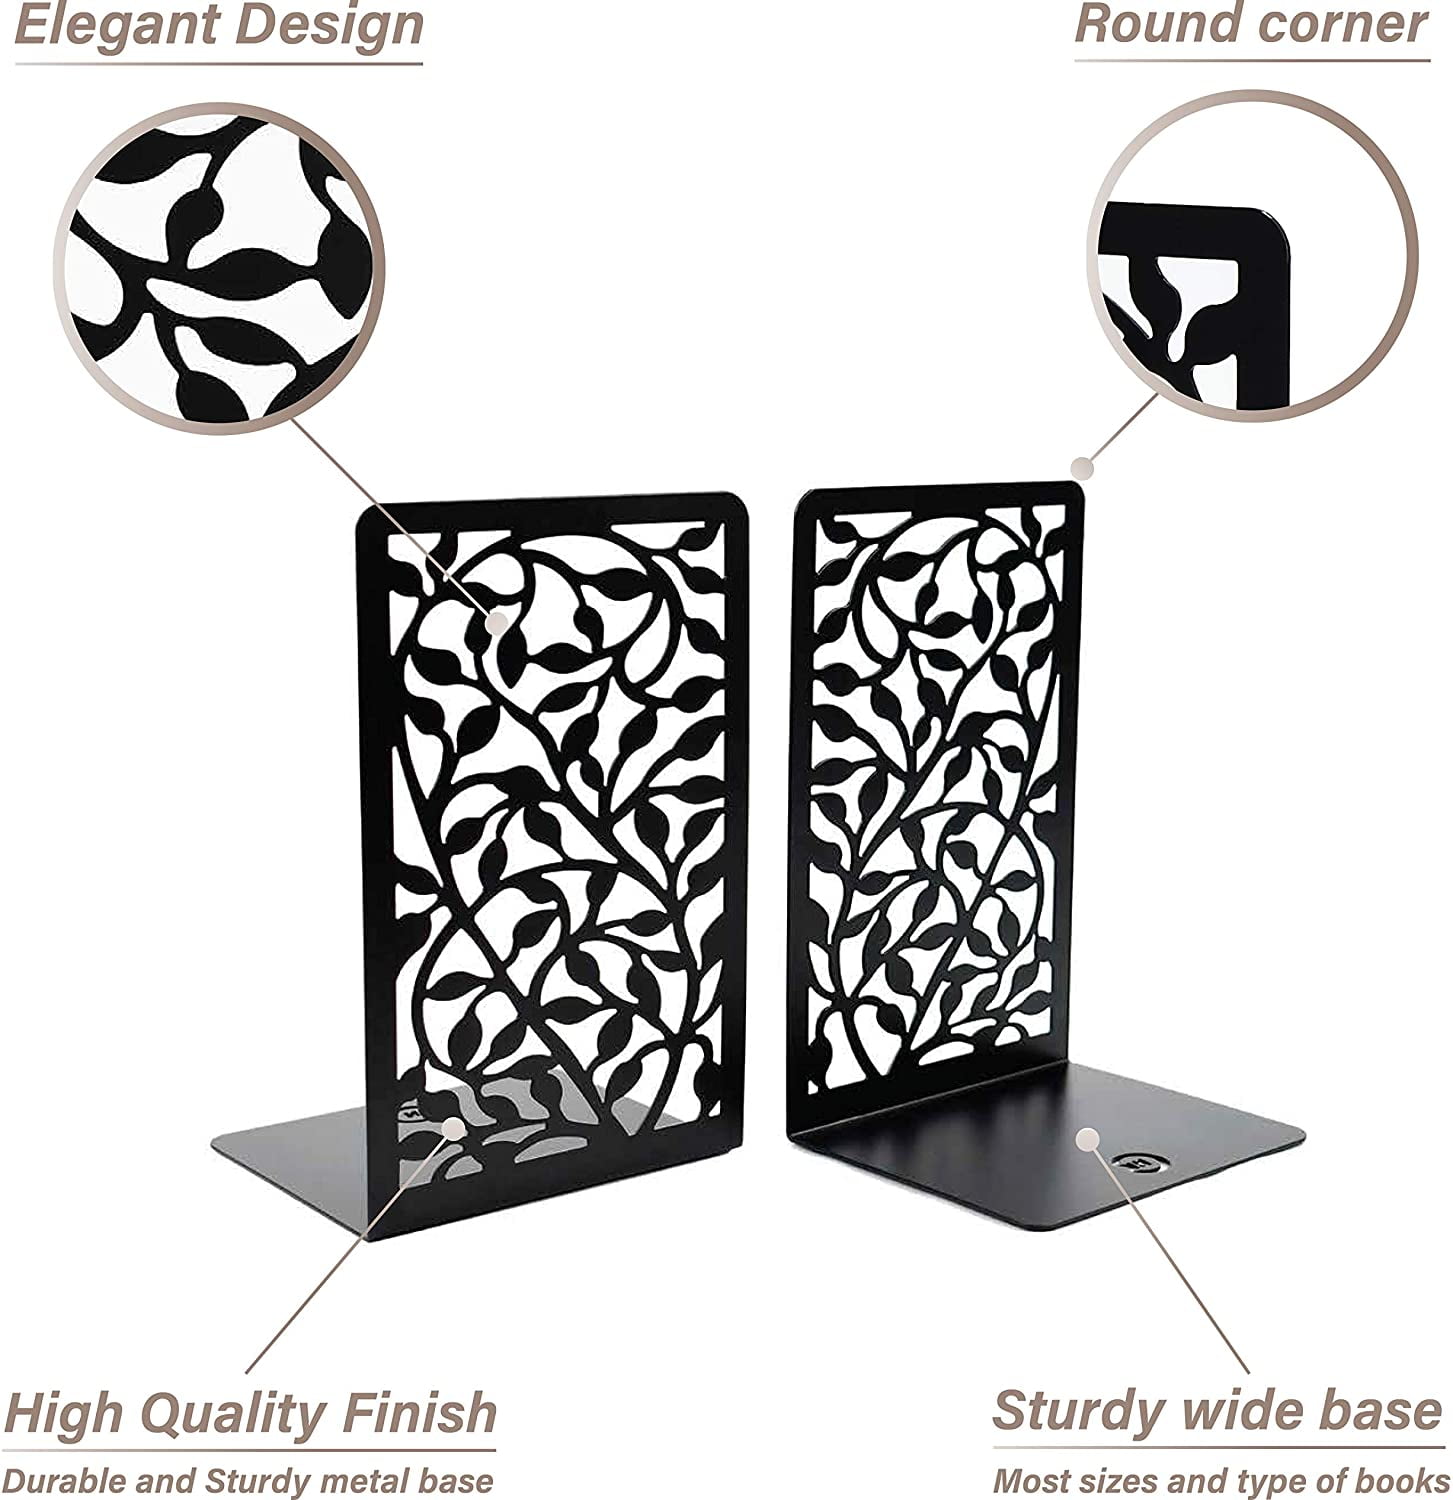 Premium Black Infinite Leaves Bookends 1 1Pair Heavy Duty Bookends for Book Shelves Metal Decorative Book Ends for Home Office Heavy Books Home Decorative Book Stoppers Book Holder 